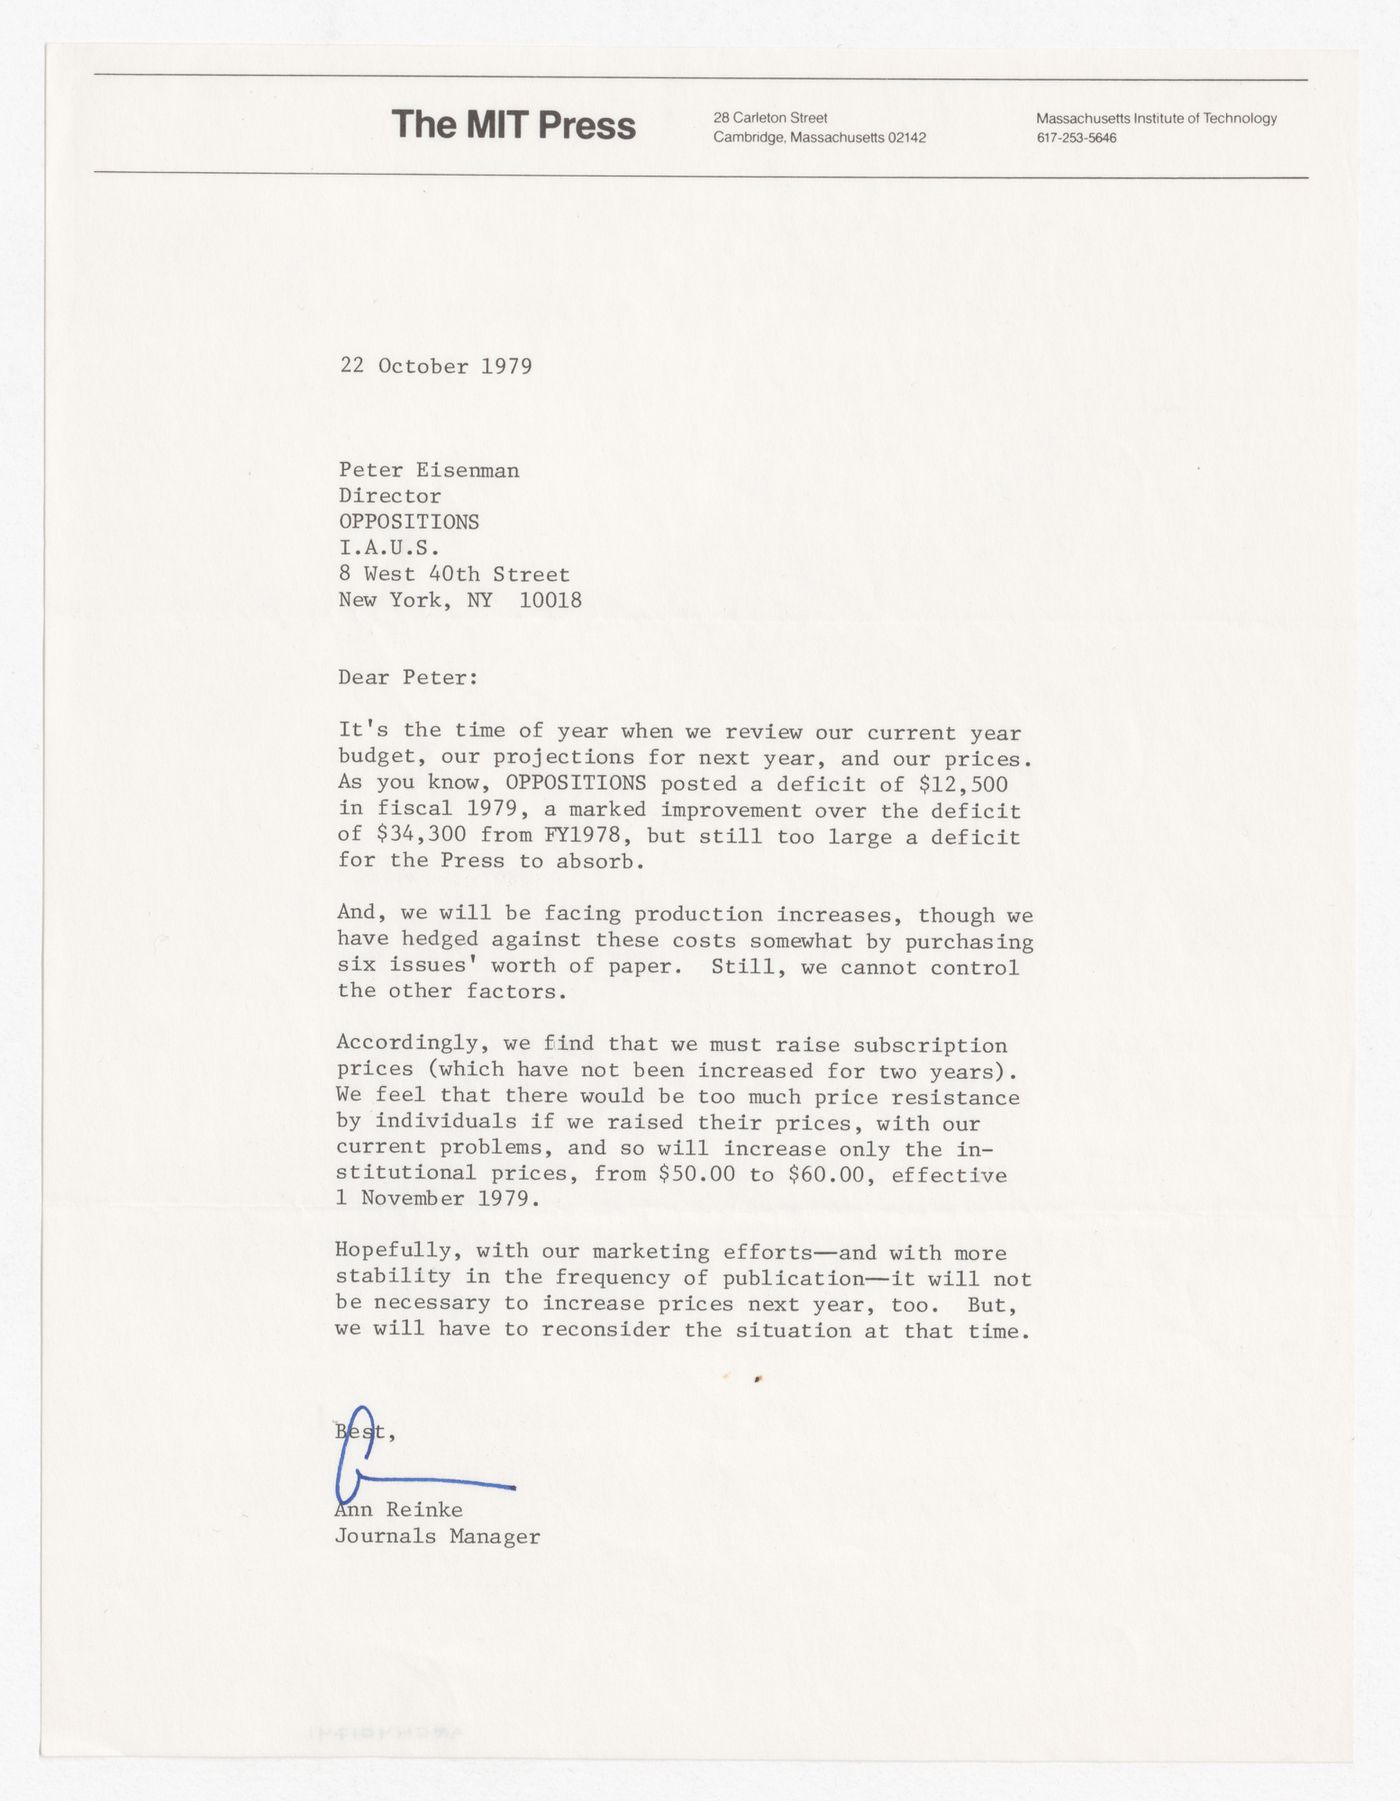 Letter from Ann Reinke to Peter D. Eisenman about subscription price for Oppositions Journal